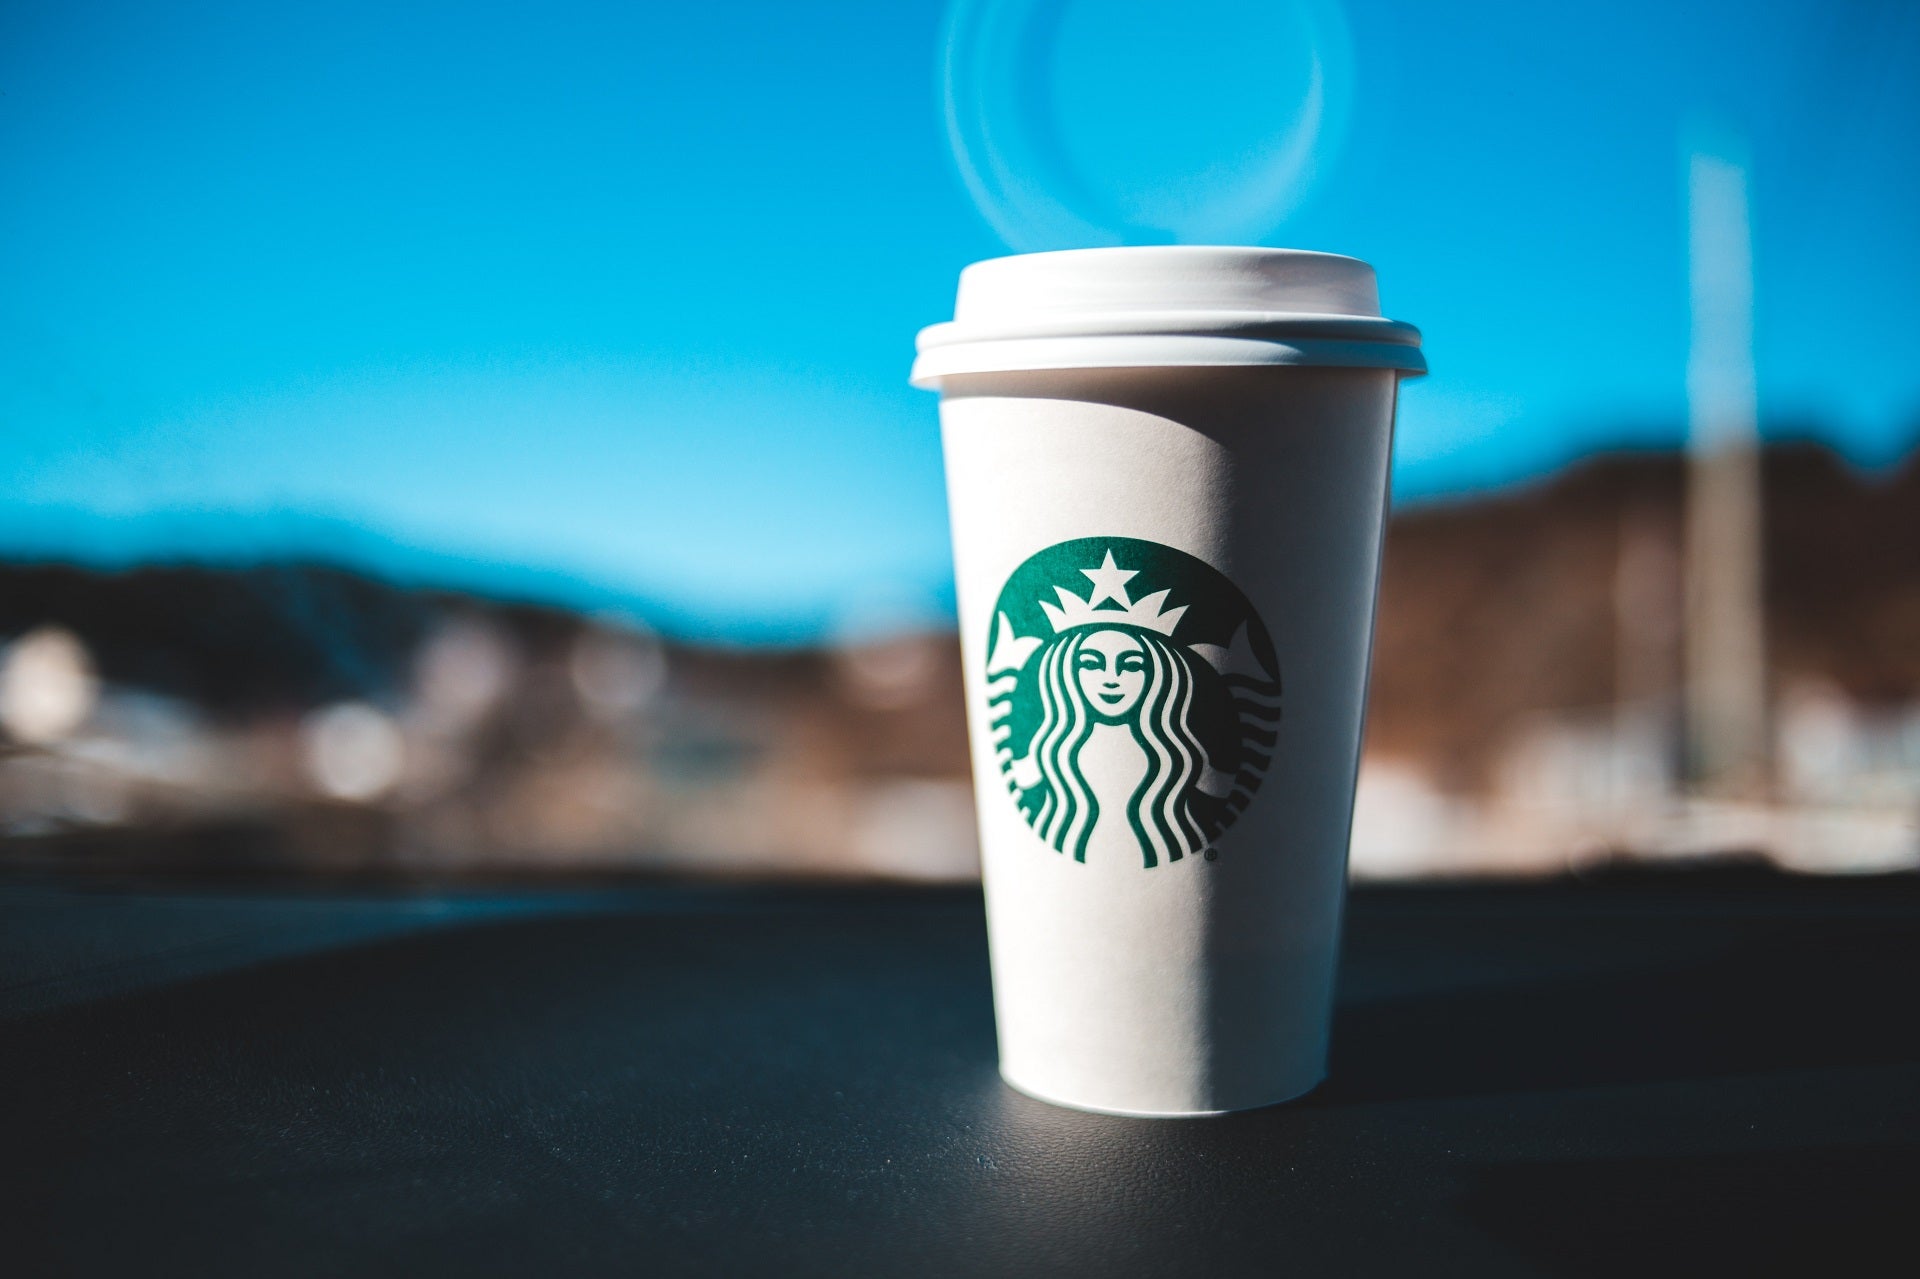 Starbucks Coffee Korea to discontinue single-use cups by 2025